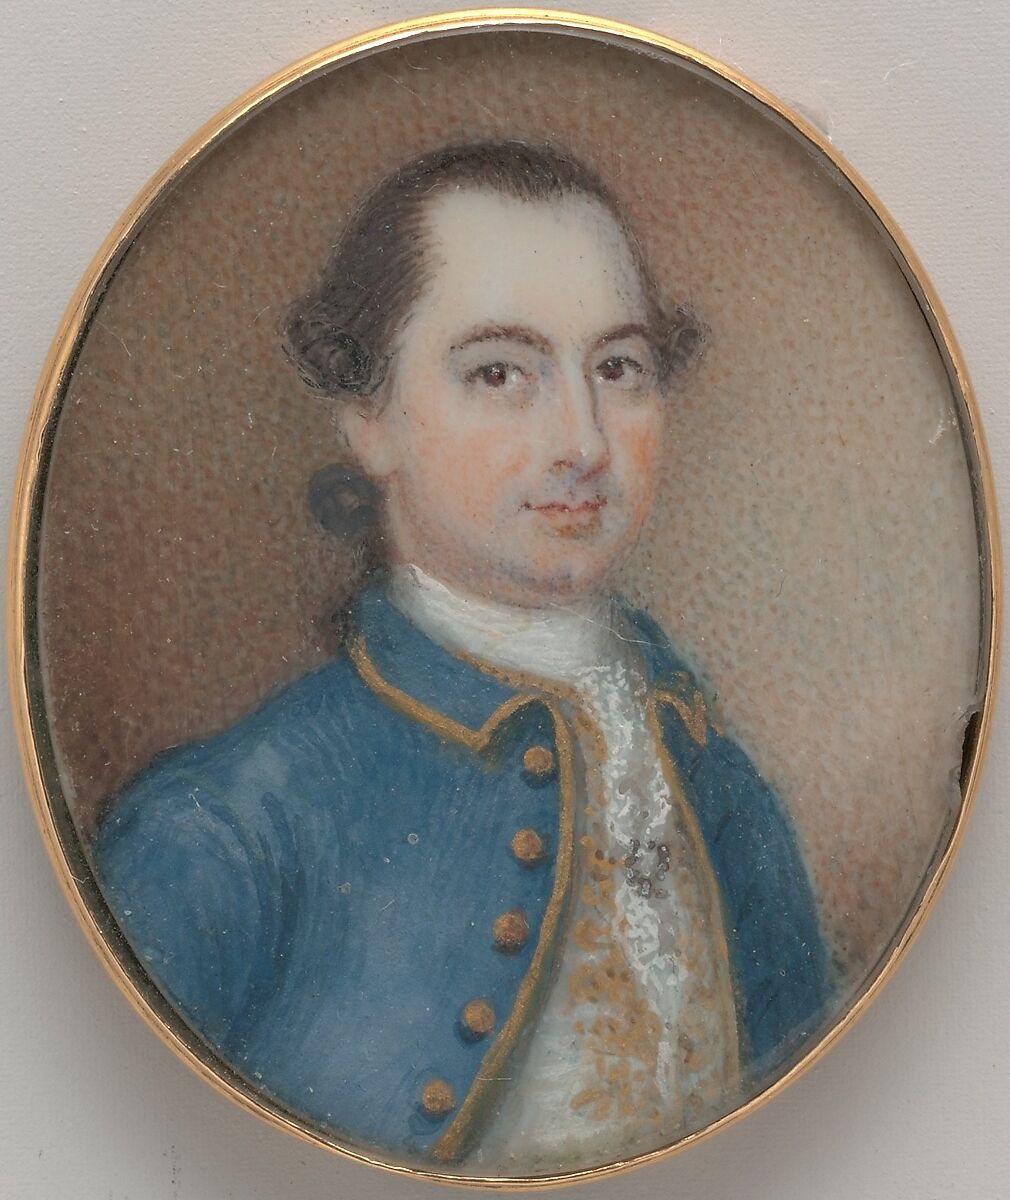 Archibald McCall, John Hesselius (1728–1778), Watercolor, gold leaf, and lead white on ivory, American 